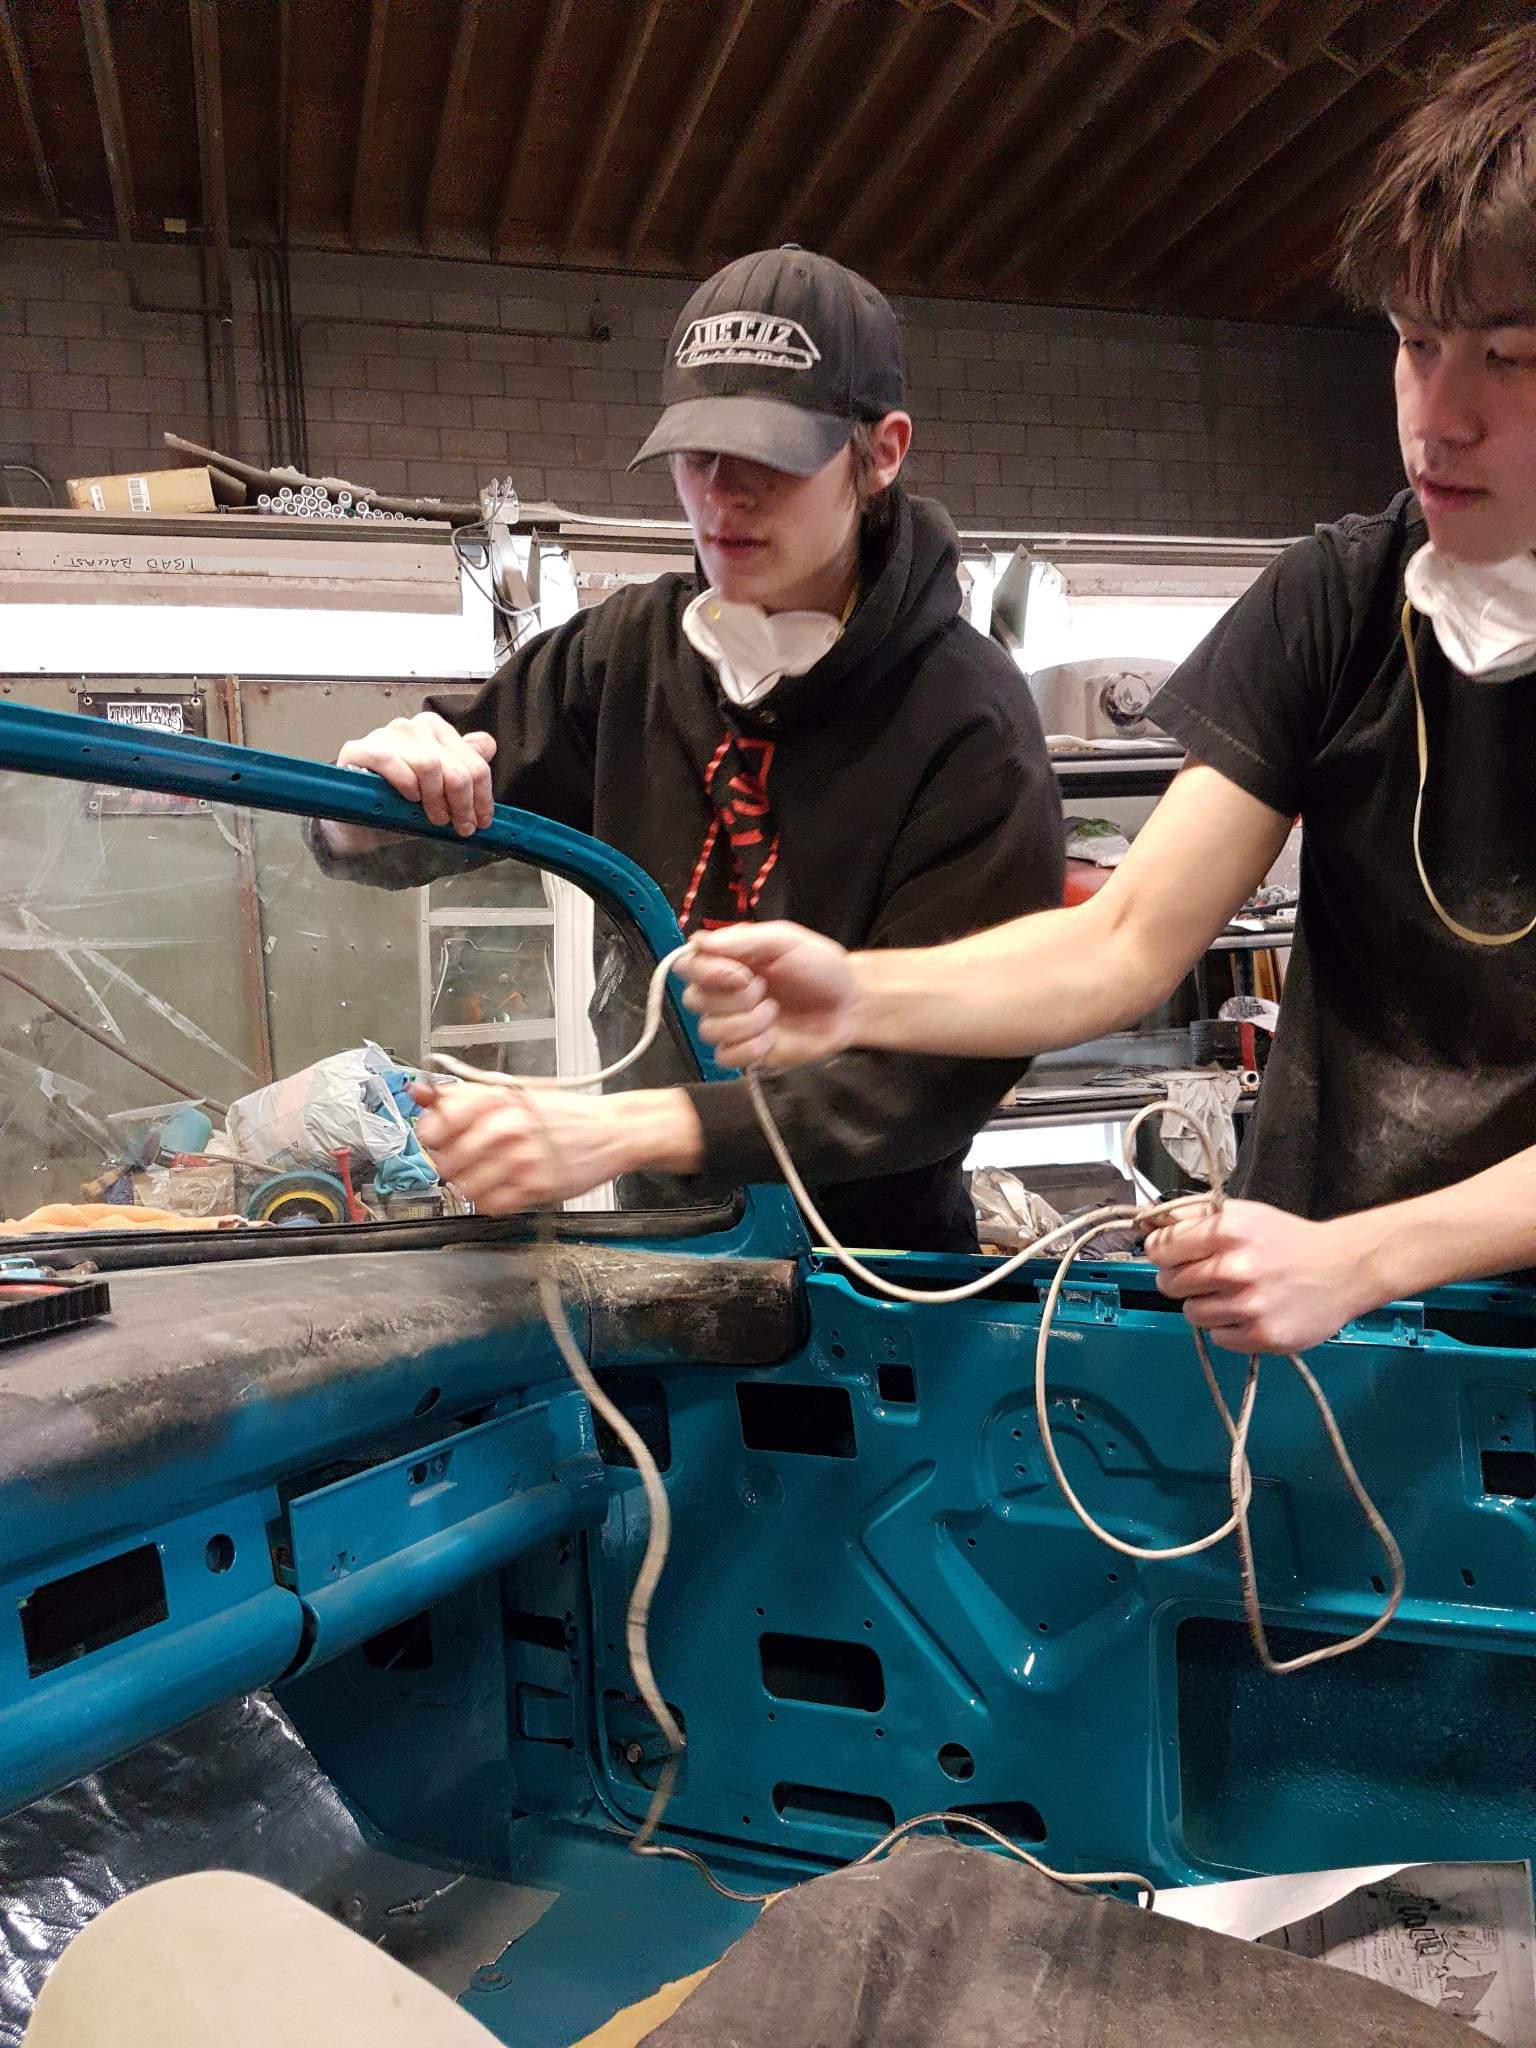 Four hands are better than two and two heads can teamwork better than one!  Our apprentices make "roping in" this 1956 T-Bird's windshield look easy!